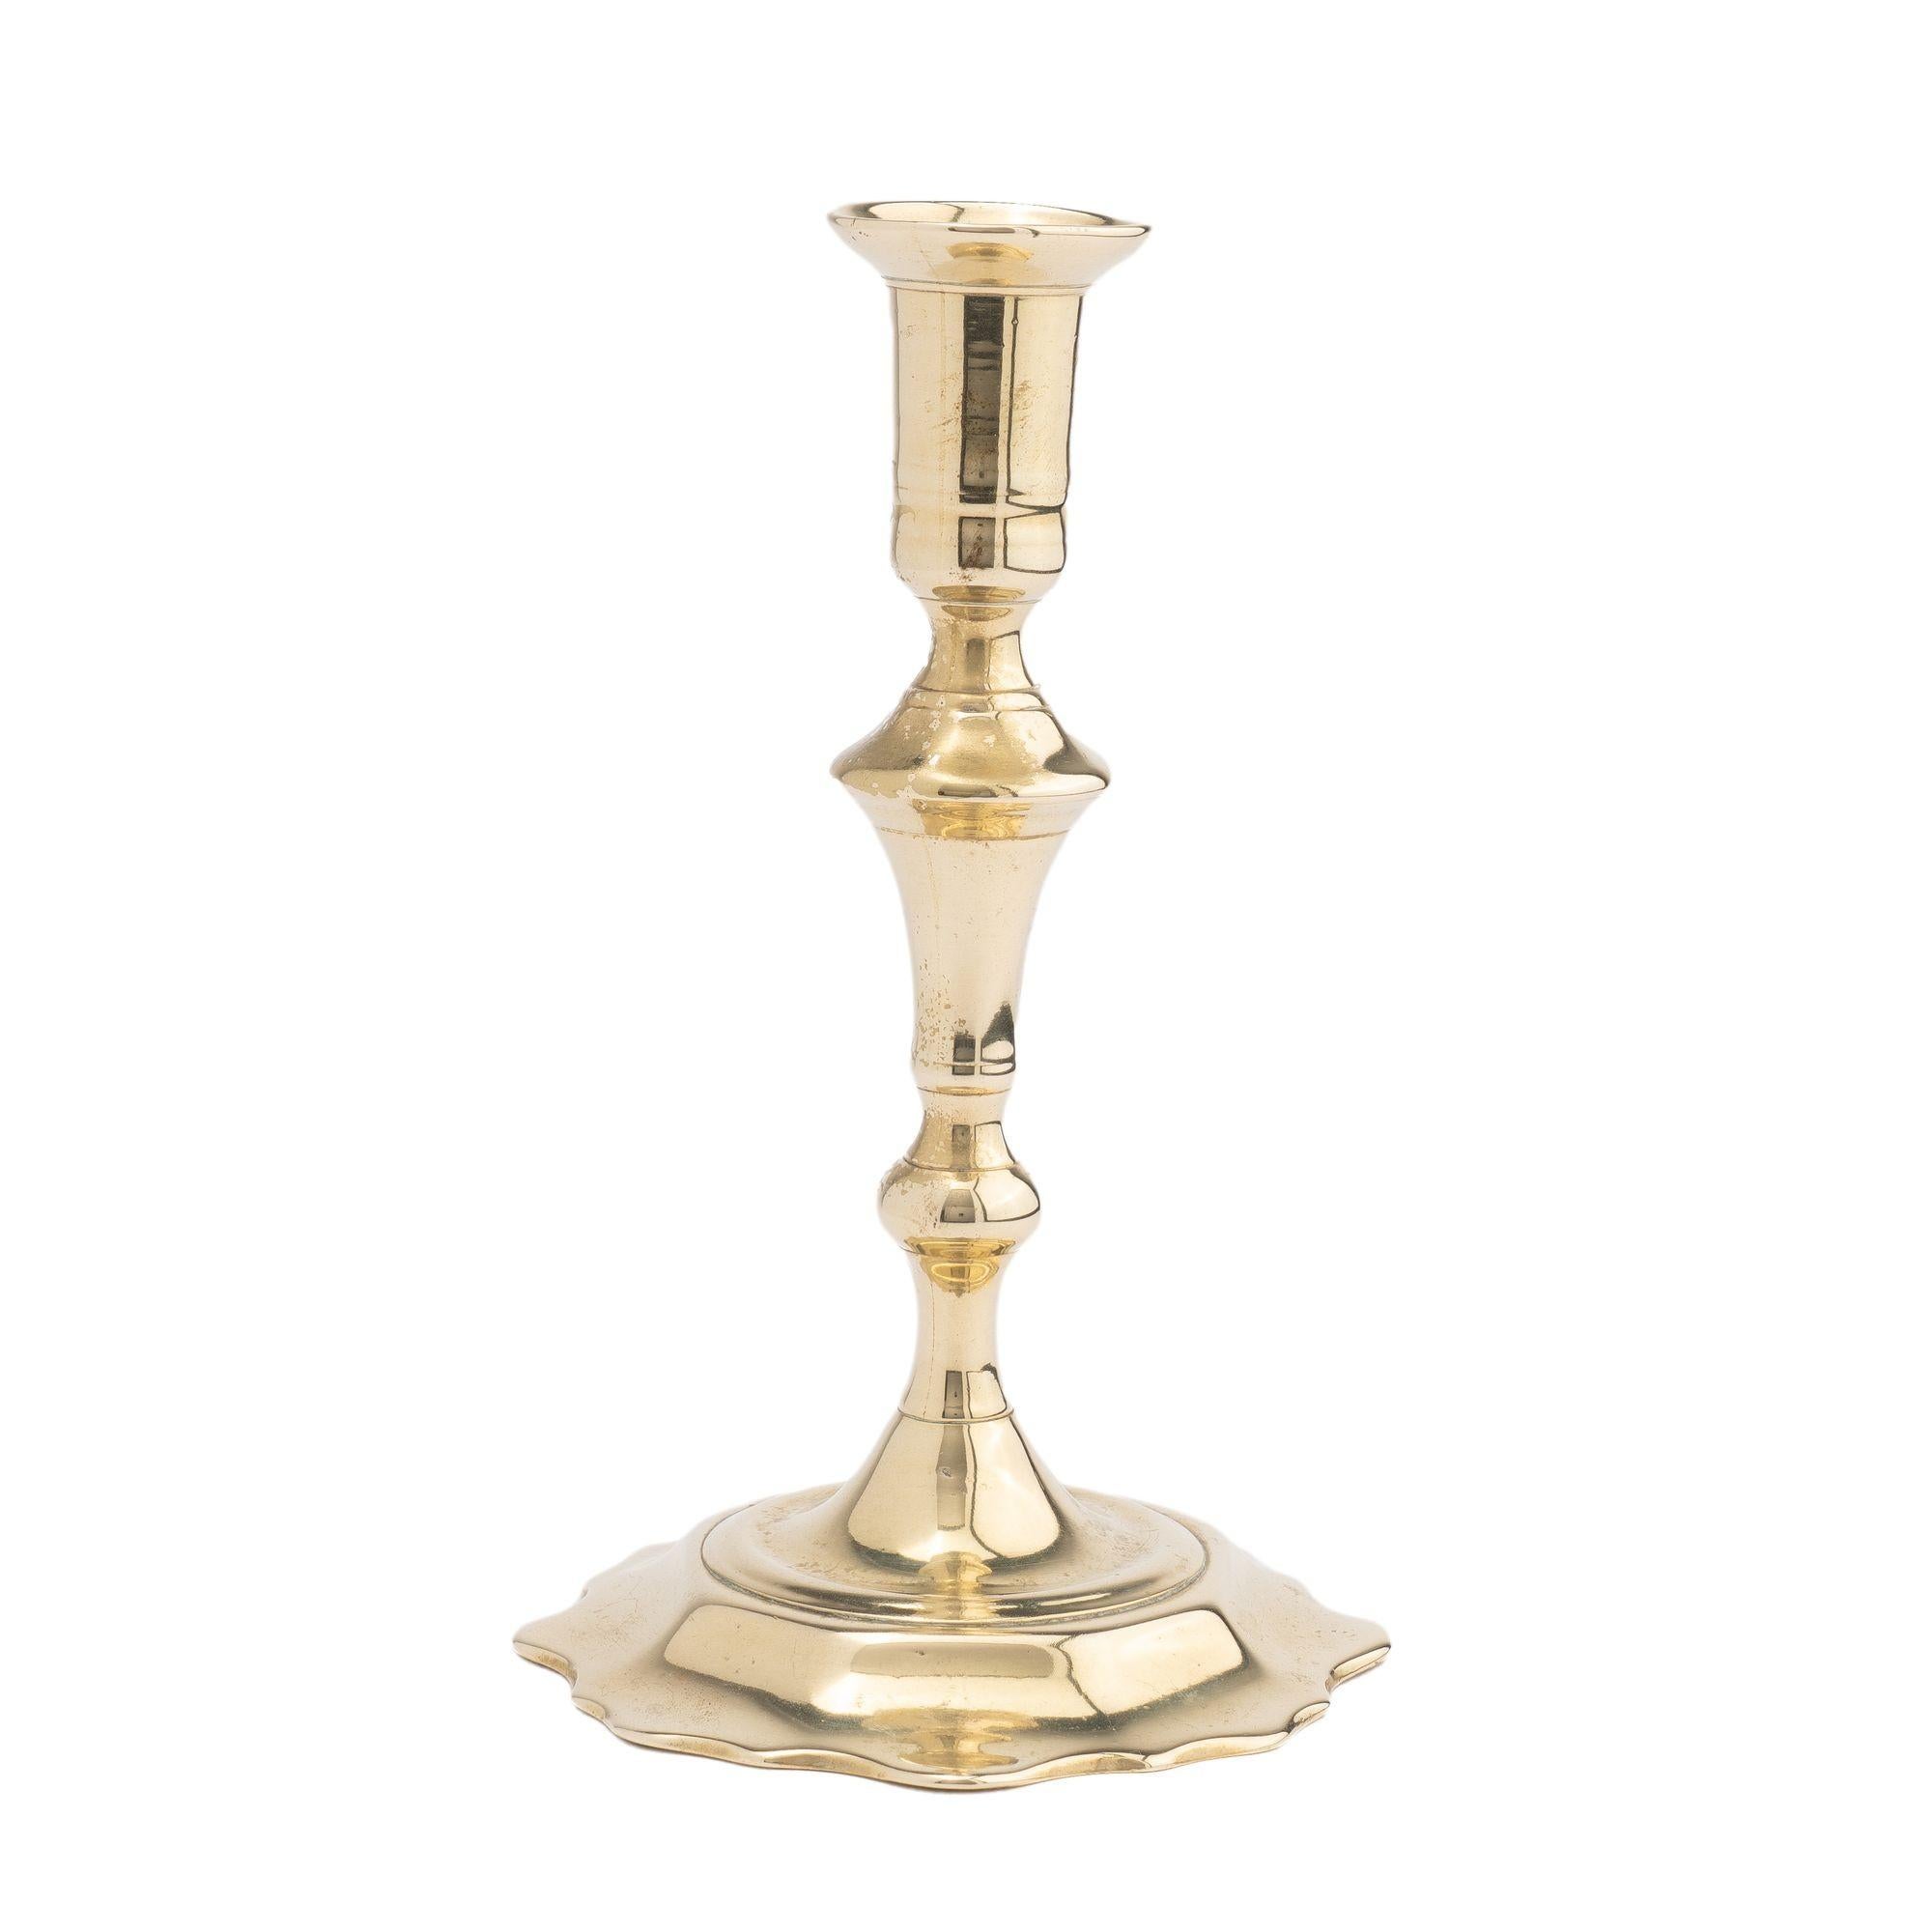 Queen Anne scollop base candlestick. Seem cast two part cast brass candlestick shaft. The shaft supports a cylindrical candle cup with dished circular bobeshe. Below the cup is a suppressed knob on an inverted trumpet form, smaller knob and short